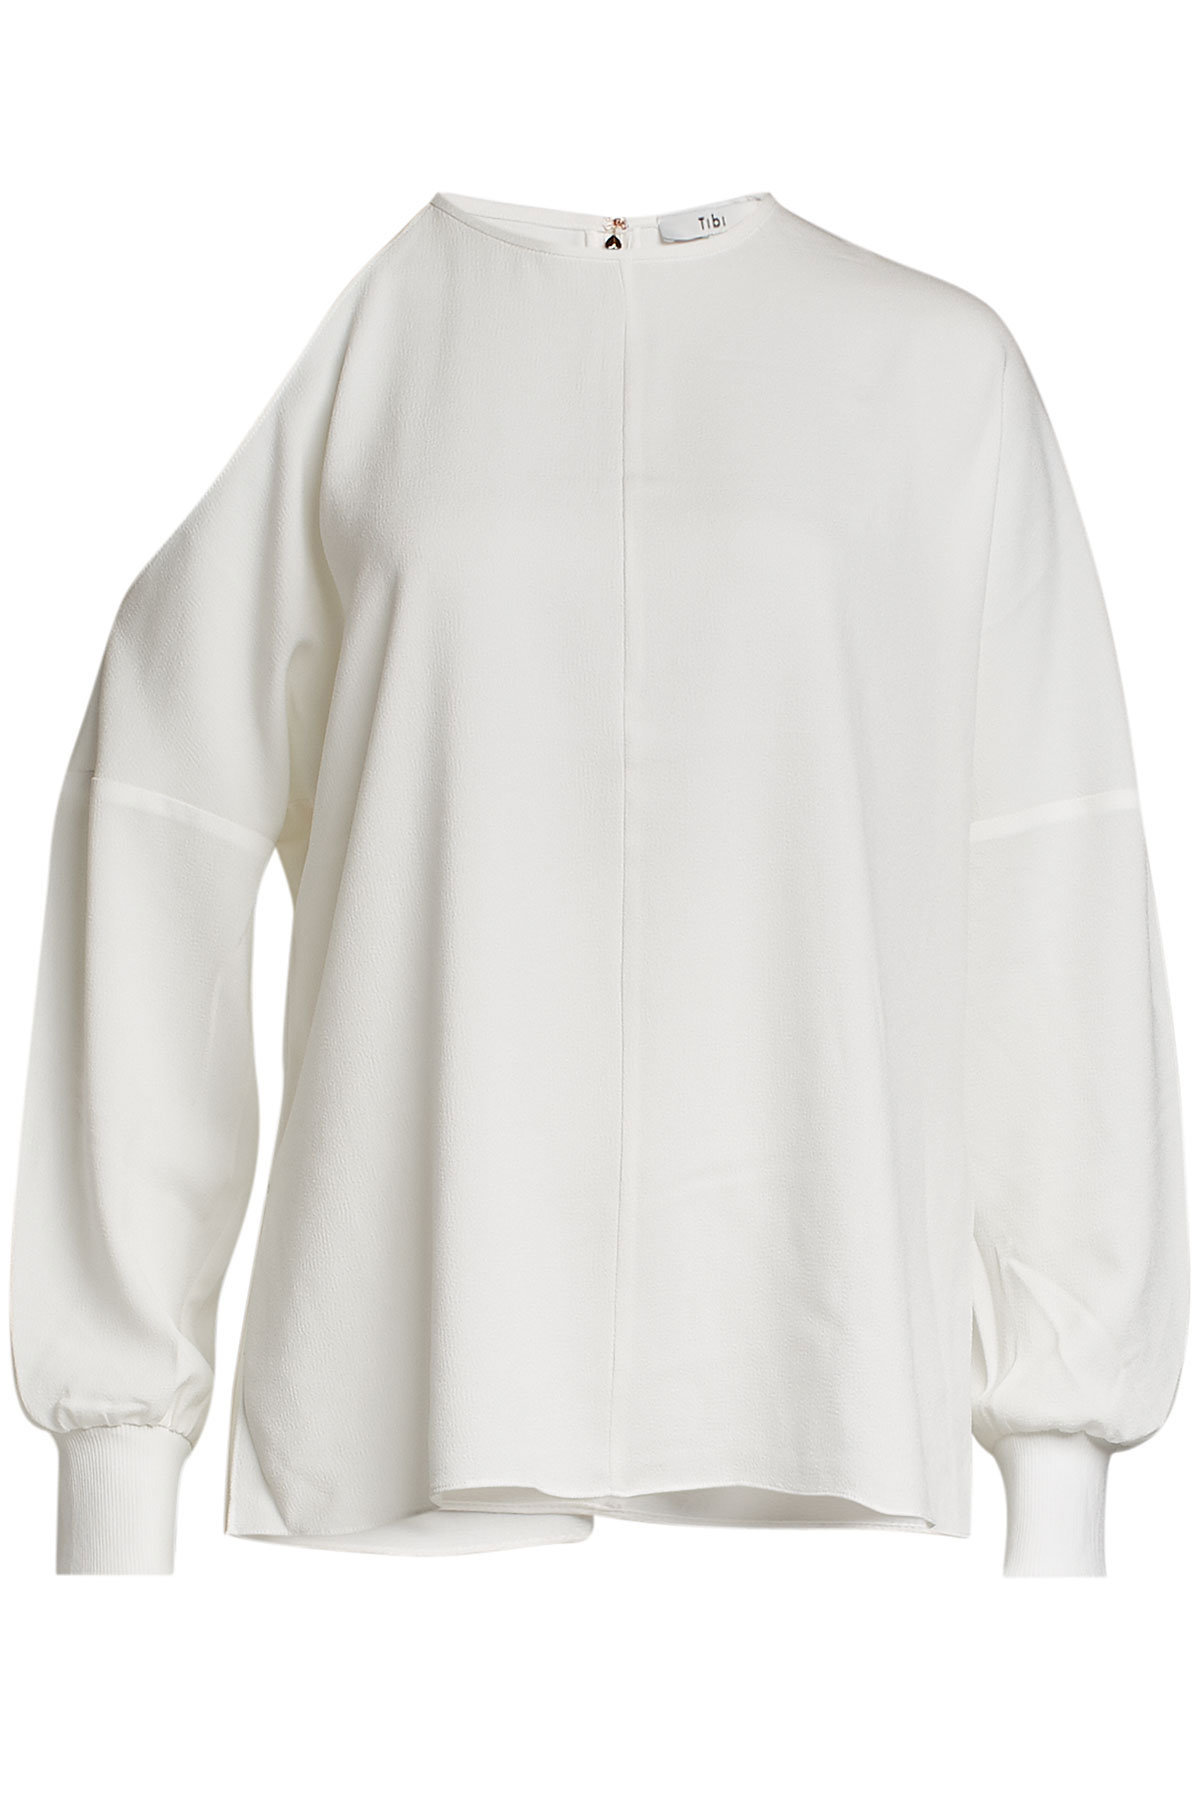 Tibi - Blouse with Cold Shoulder